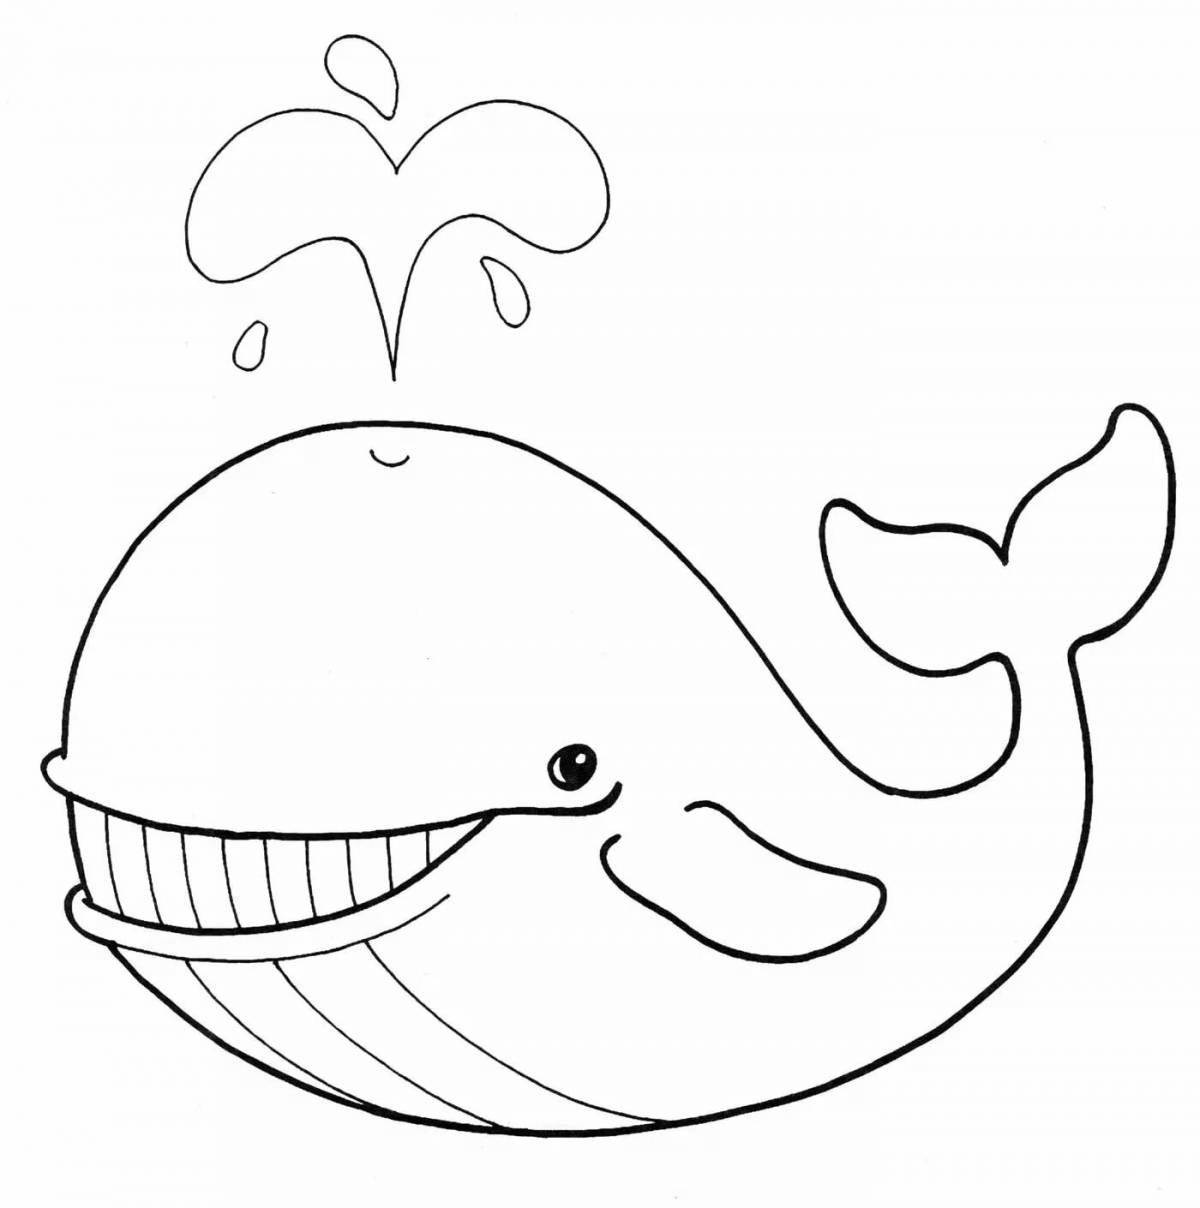 Amazing three whales in music coloring book